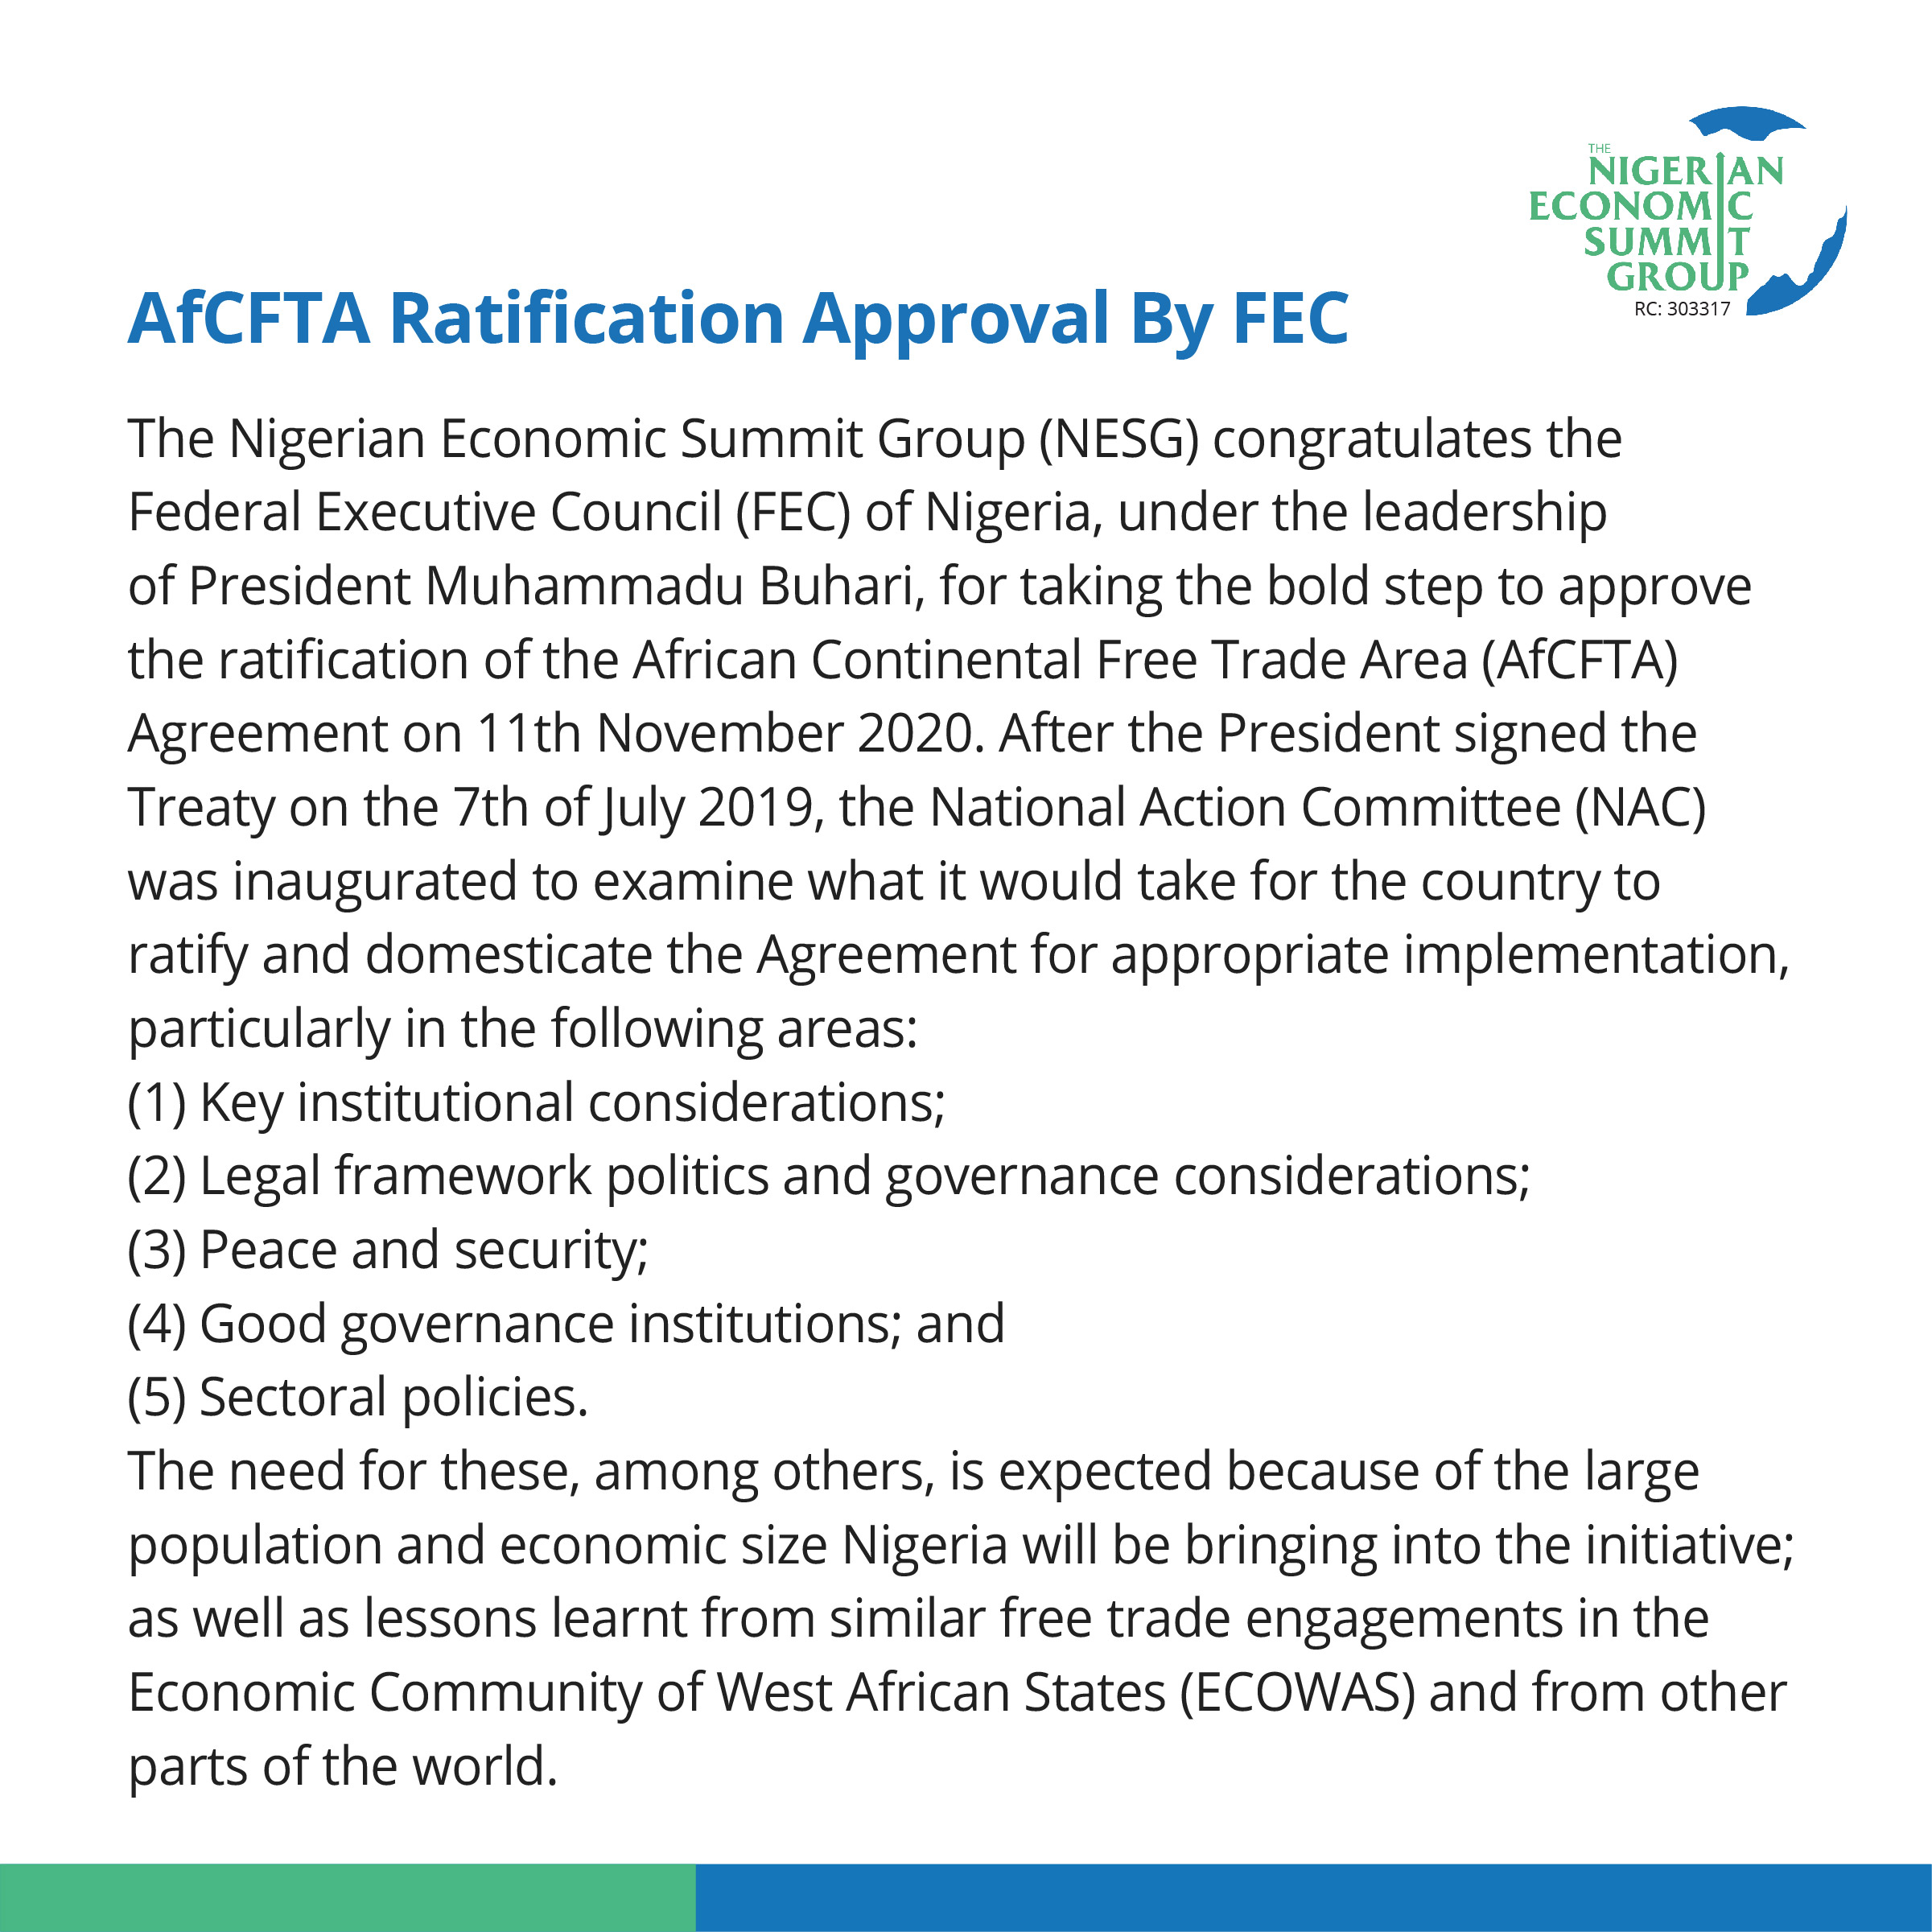 AfCFTA Ratification approval by the Federal Executive Council